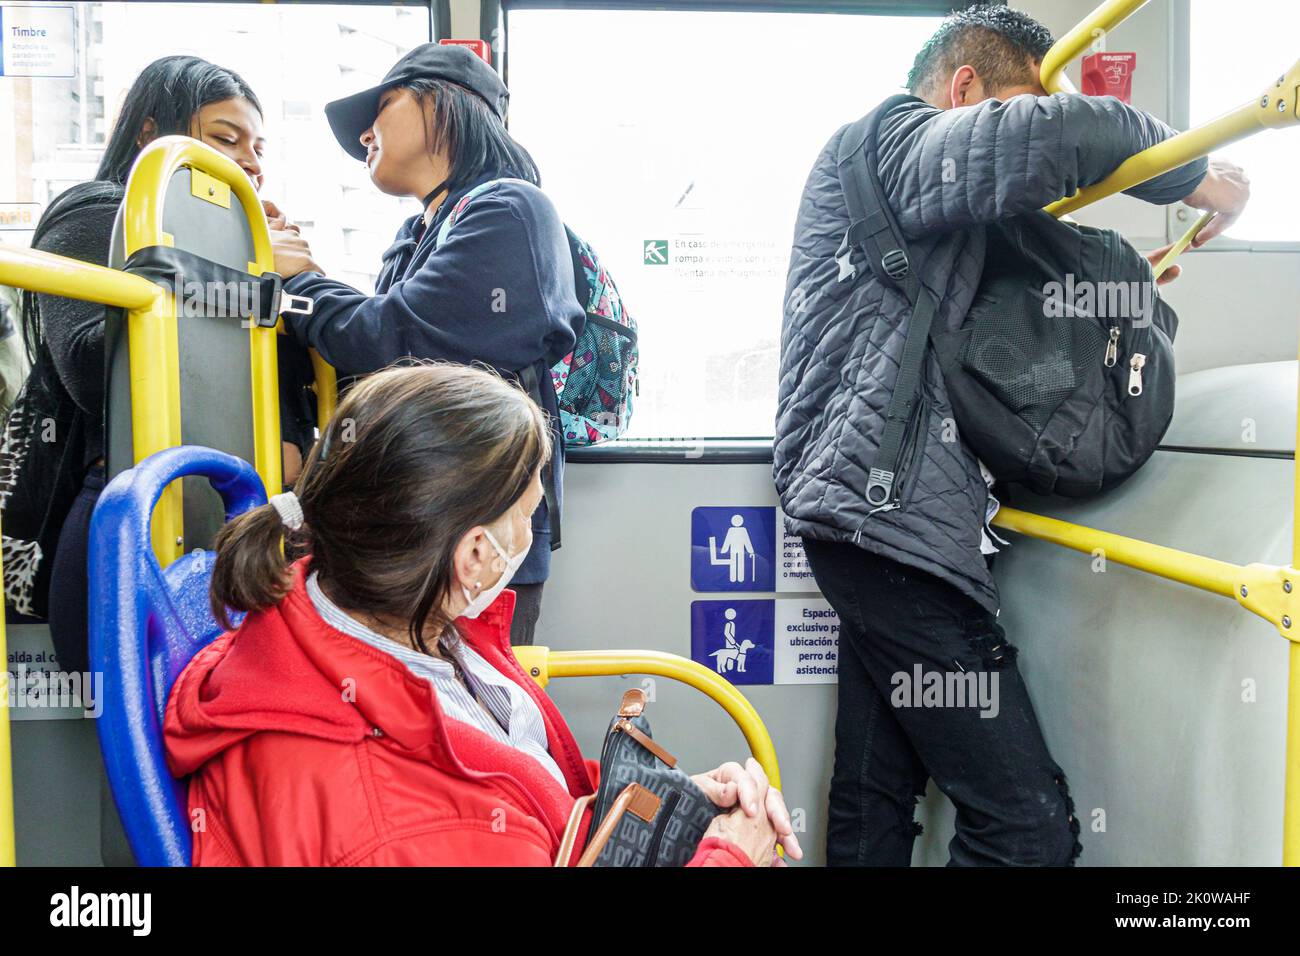 Bogota Colombia,San Victorino Carrera 10 riding Transmilenio route D206 passengers,teen teens teenage teenager teenagers youth,bus rapid transit syste Stock Photo